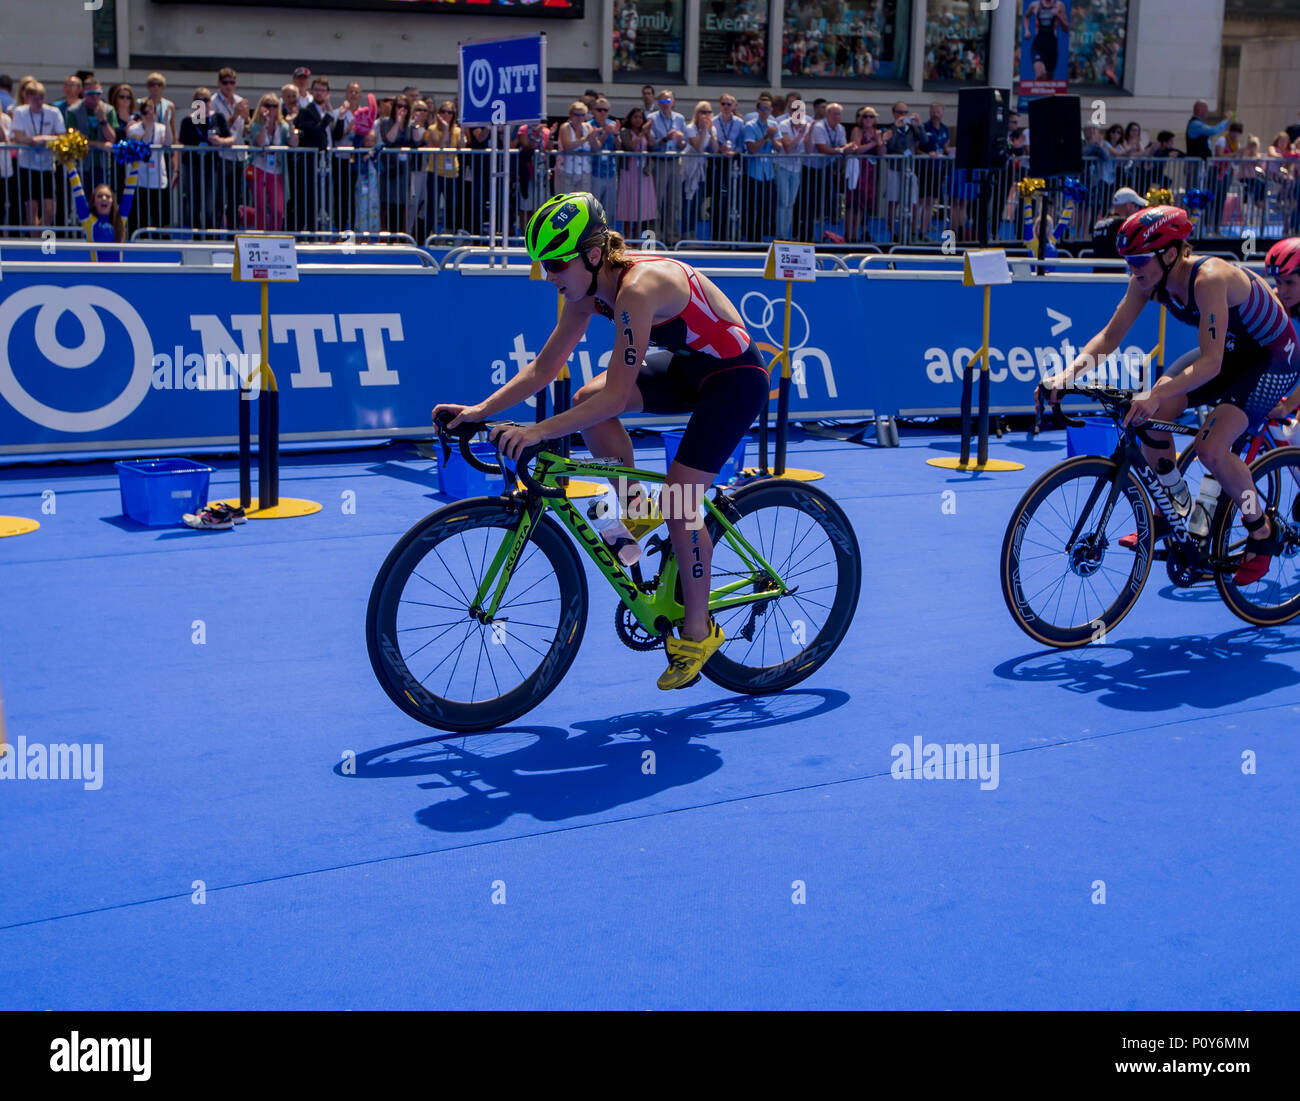 Leeds, UK. 10th June, 2018. AJ Bell World Triathlon Series, Leeds; Jessica Learmonth (GBR) riding through Transition 2 chased by Katie Zaferes (USA) during the bike discipline of the AJ Bell World Triathlon Leeds Credit: Action Plus Sports/Alamy Live News Stock Photo